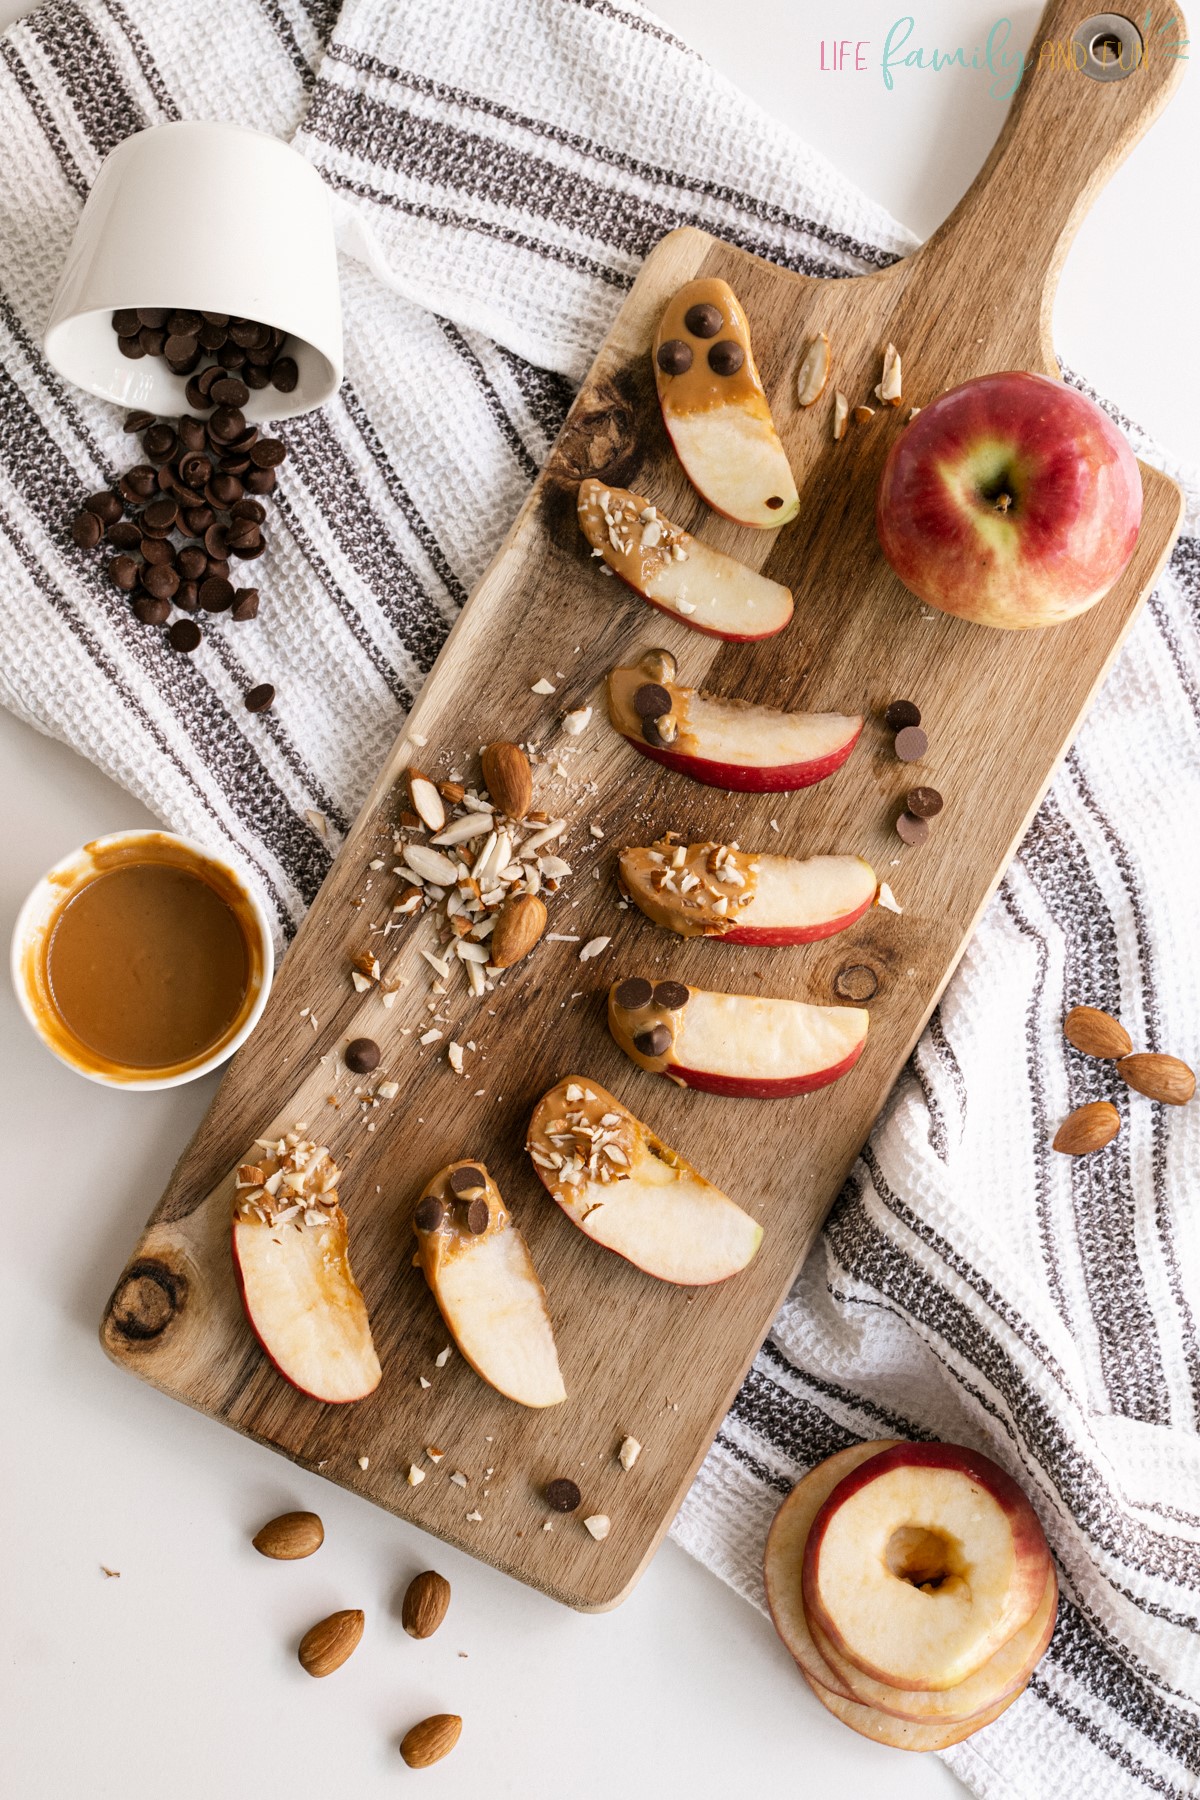 Apple Slices with Peanut Butter - Fall recipe